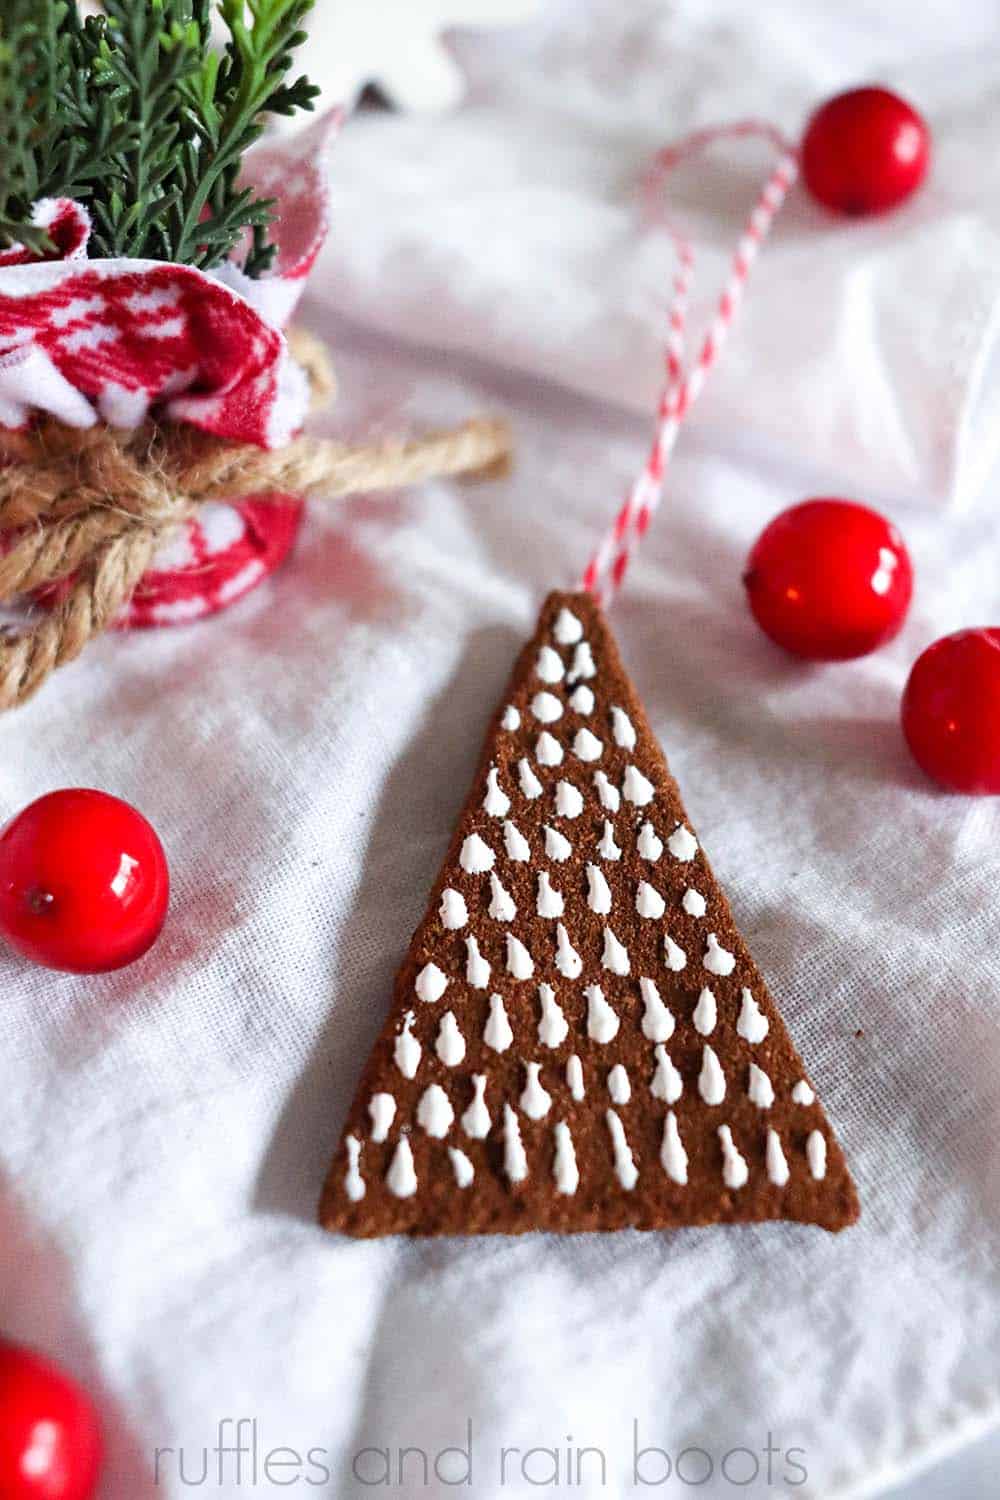 Christmas tree ornament made with no bake cinnamon spice dough recipe with red twine string on a white background with red berries and holiday pine